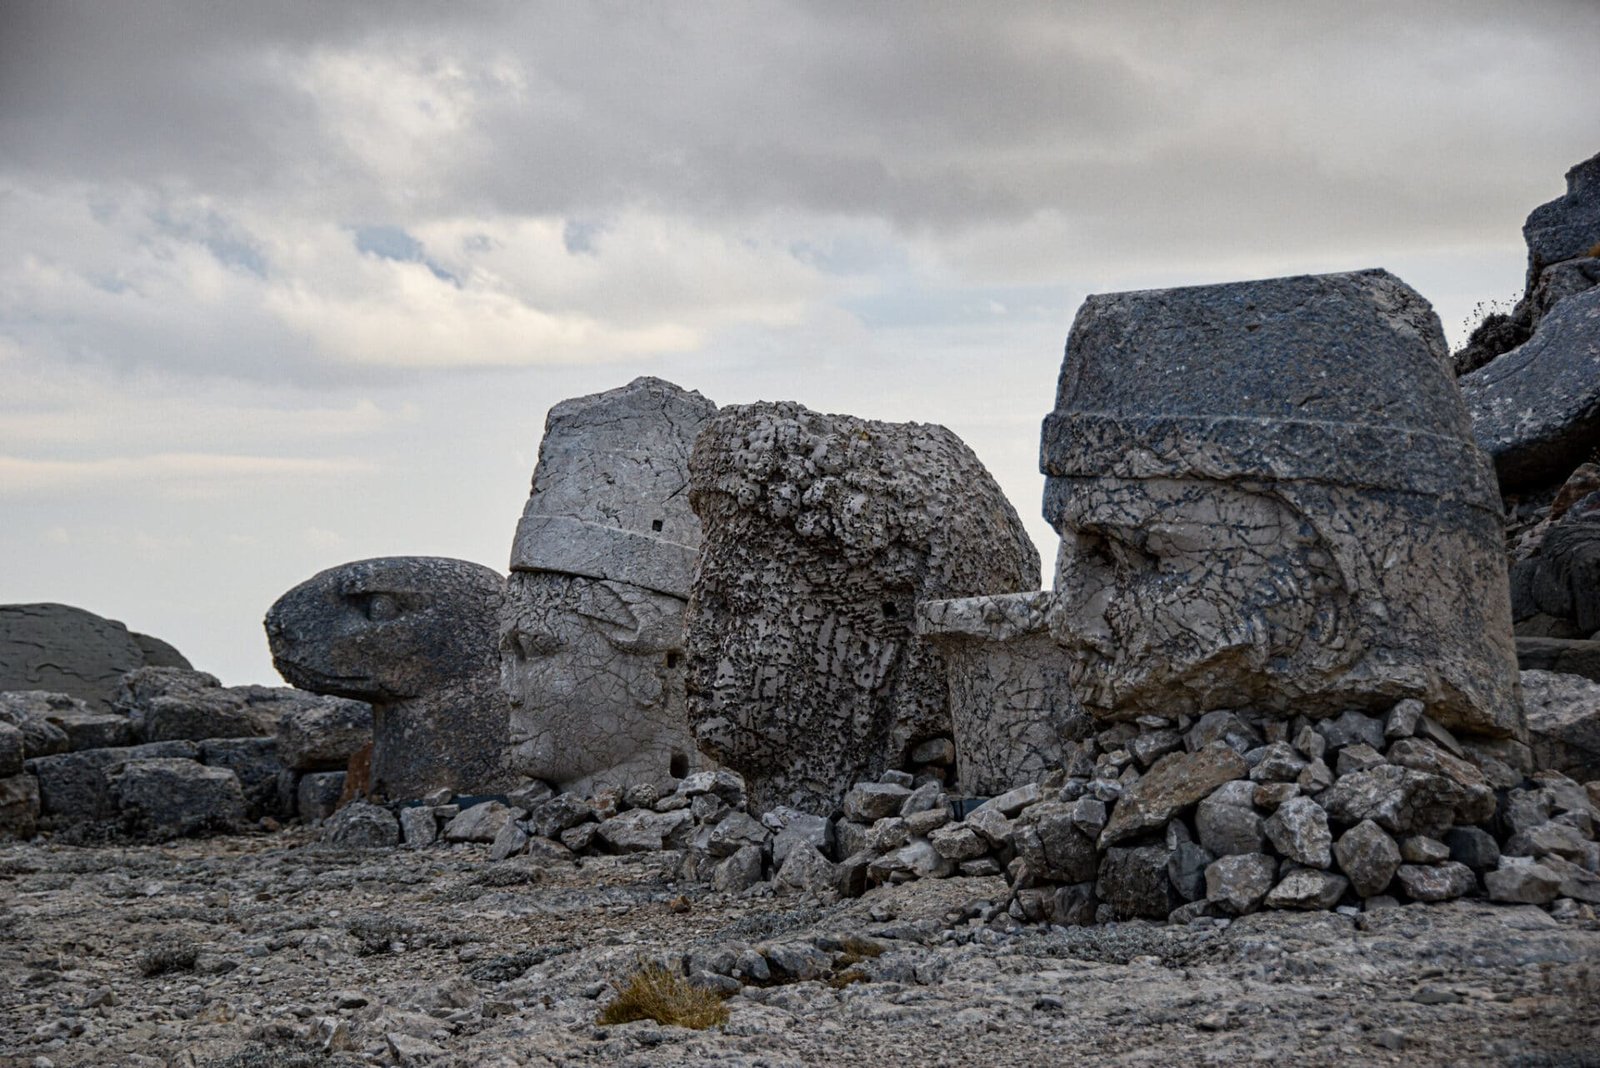 four decapitated heads of god statues sit on the rocky ground on Mount Nemrut